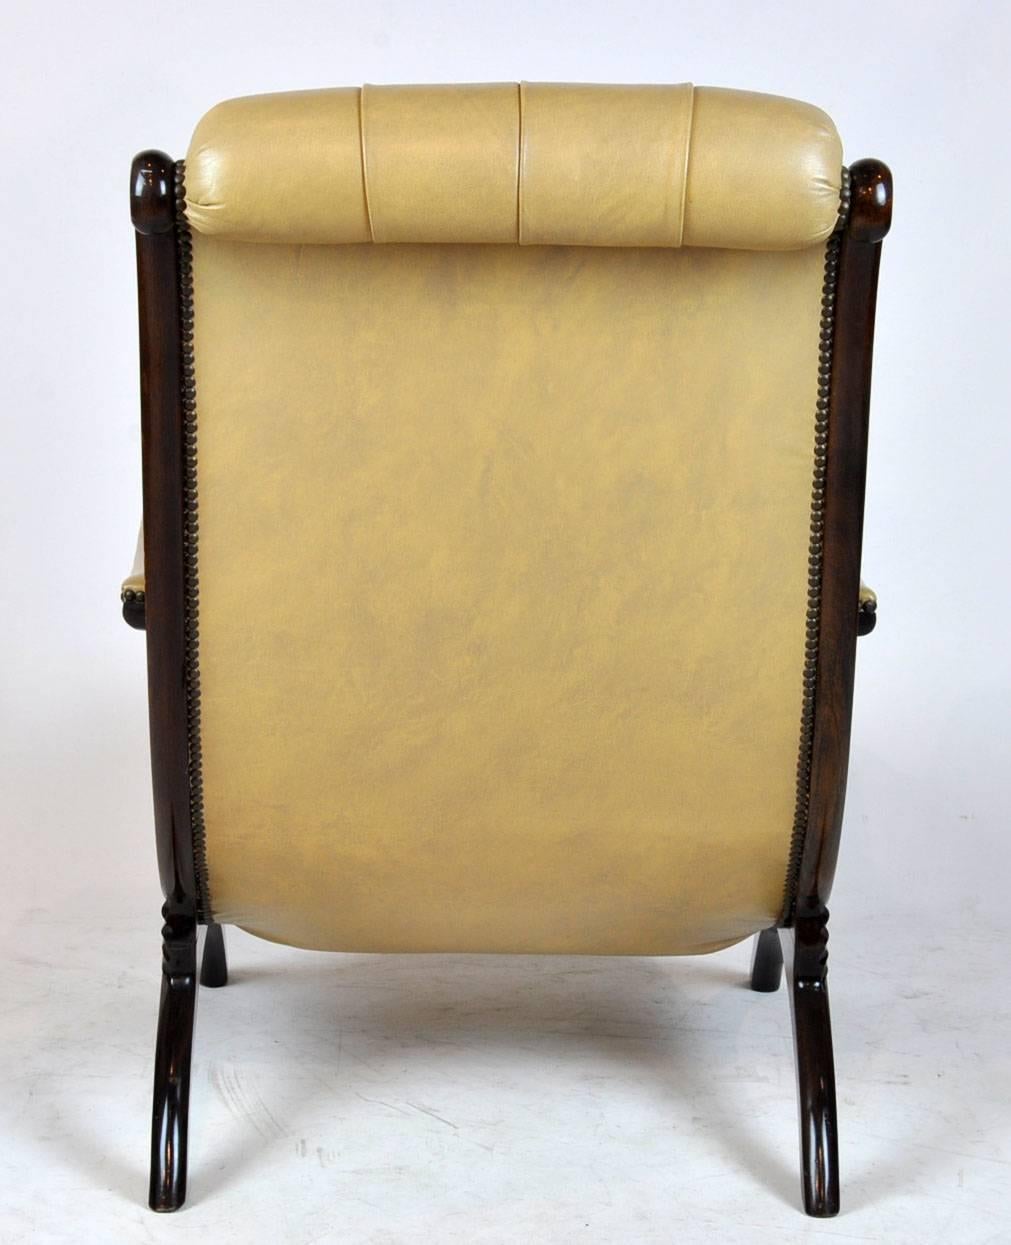 campeche chair for sale